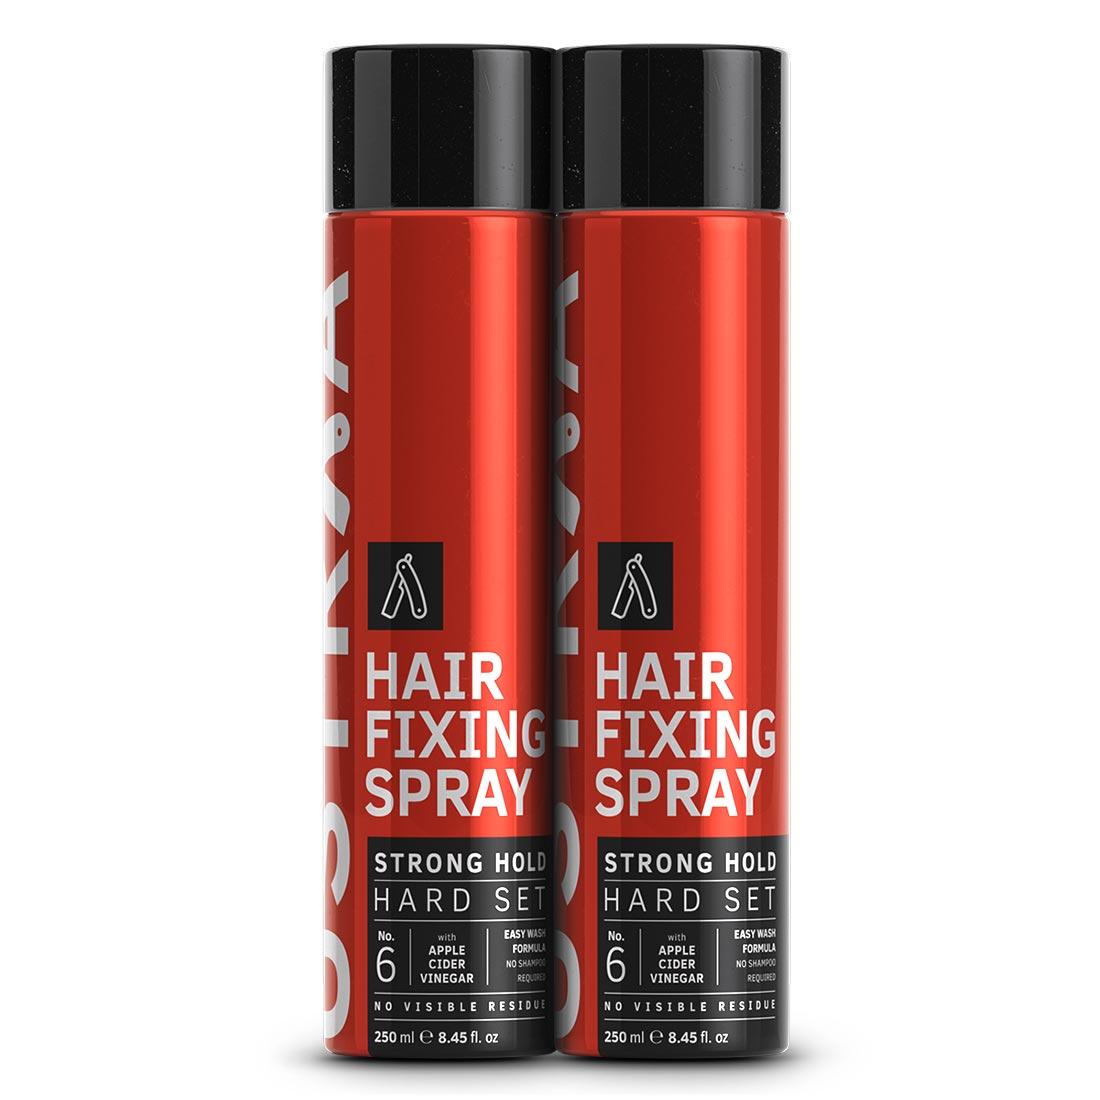 Hair Fixing Spray - Strong Hold - 250ml (Set of 2)